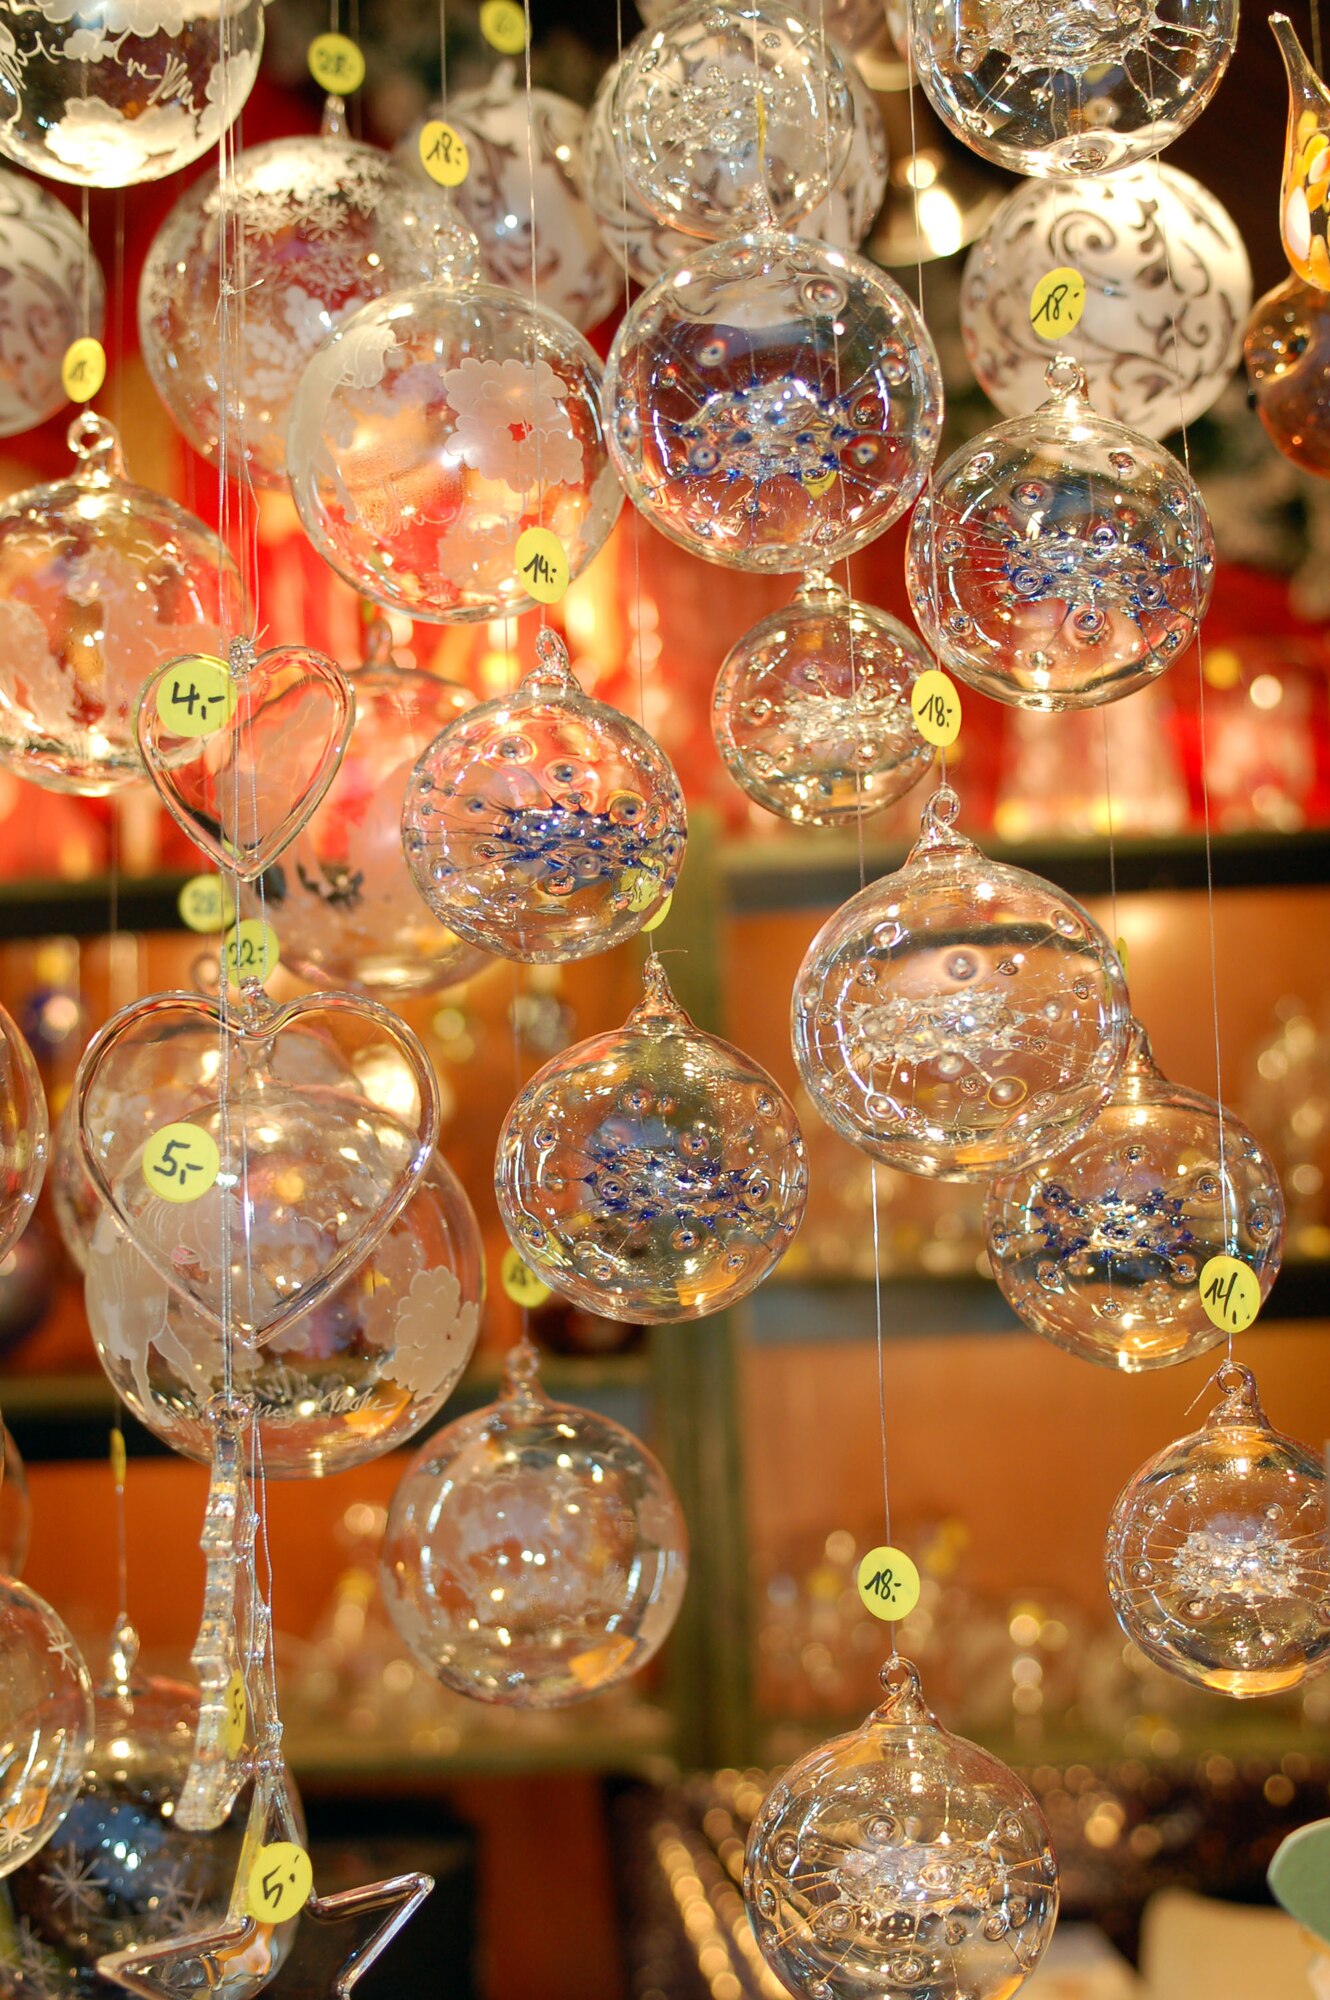 SPANGDAHLEM AIR BASE, Germany -- Glass decorative holiday ornaments hang from a sales booth at Trier’s Weihnachtsmarkt Dec. 8 in the main market square in Trier. Many different kinds of handmade wood, straw and glass ornaments are sold at this market now through Dec. 22. Opening times for the market are 10:30 a.m. - 8:30 p.m. Monday through Wednesday, 10:30 a.m. - 9:30 p.m. Thursday through Saturday, and 11 a.m. - 8:30 p.m. Sunday. Highlights include a performance by the U.S. Air Forces in Europe Brass Band from 6 - 7 p.m. Dec. 13. Music and entertainment is scheduled throughout each weekend, and Sankt Nikolaus will visit often. (U.S. Air Force photo/Iris Reiff)